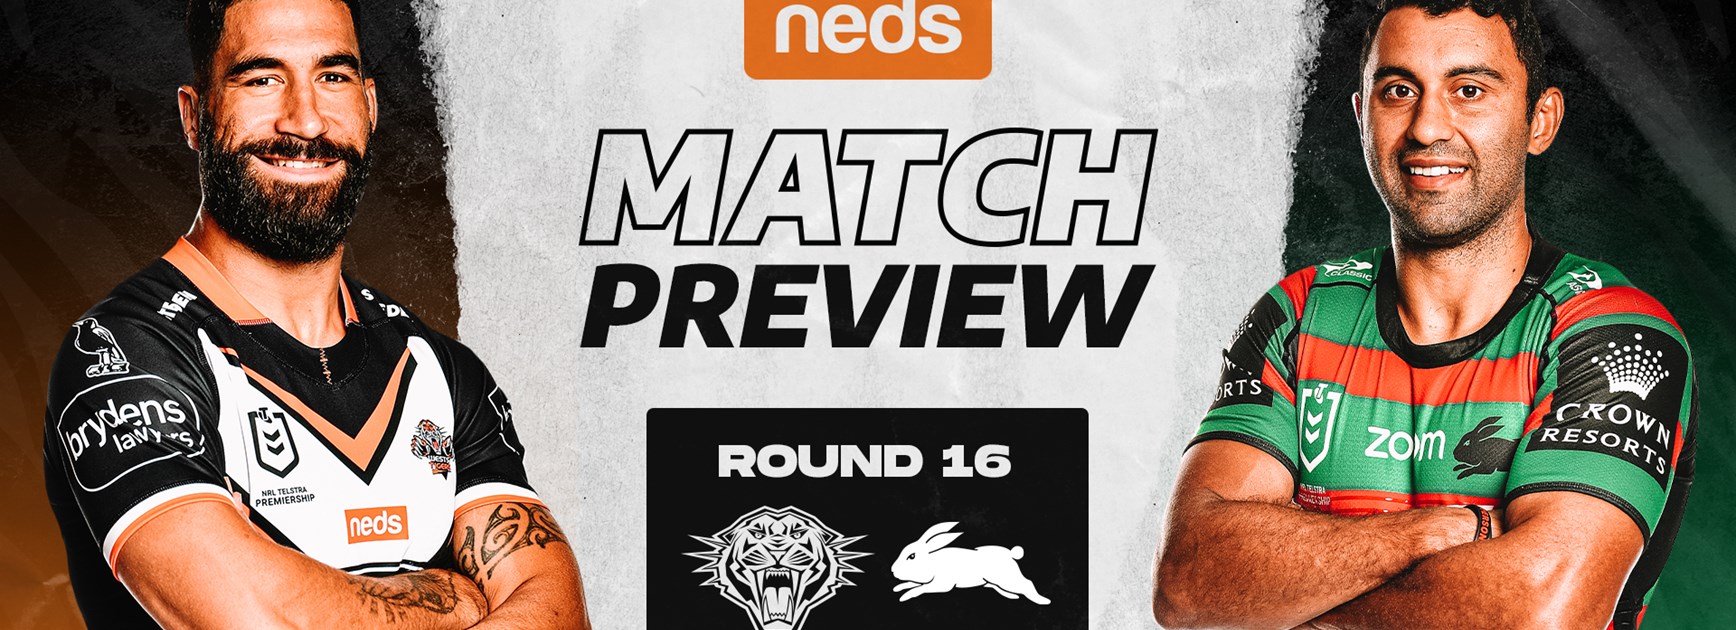 Neds Match Preview: Round 16